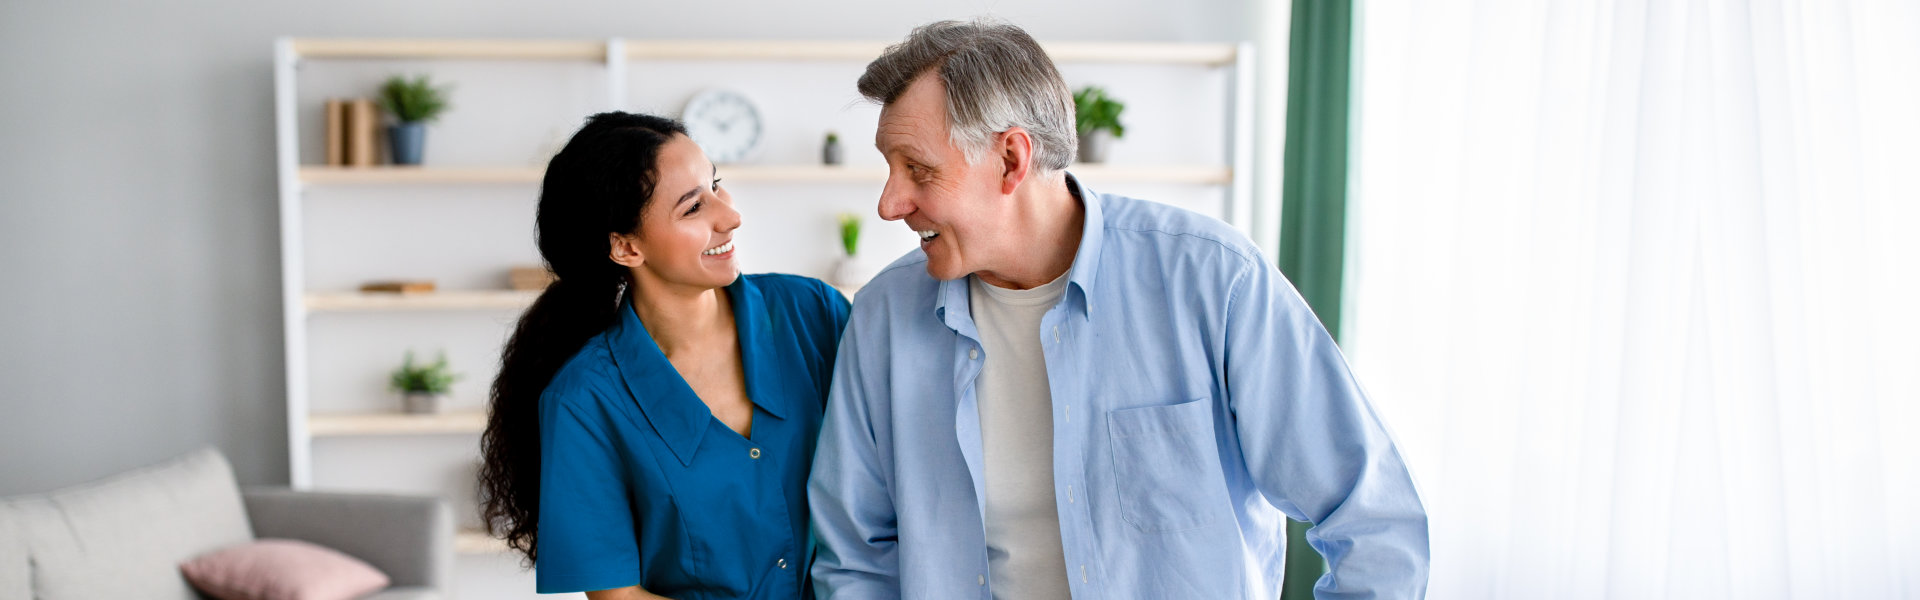 elderly man and nurse smiling to each other